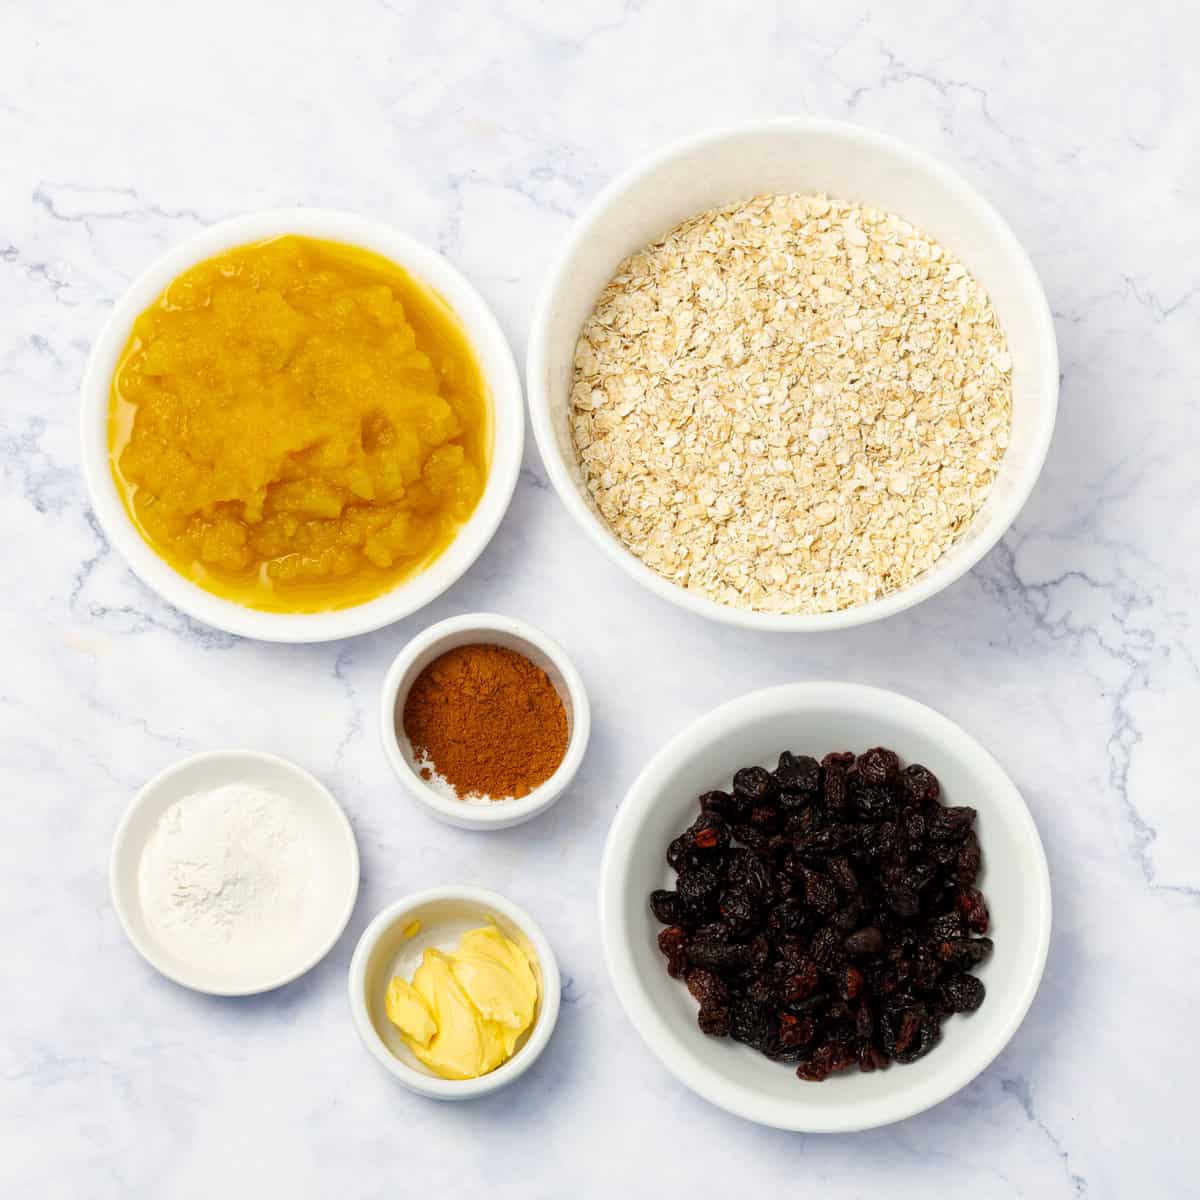 Ingredients of oats, pumpkin puree, cinnamon, raisins, butter, and stevia in separate dishes.